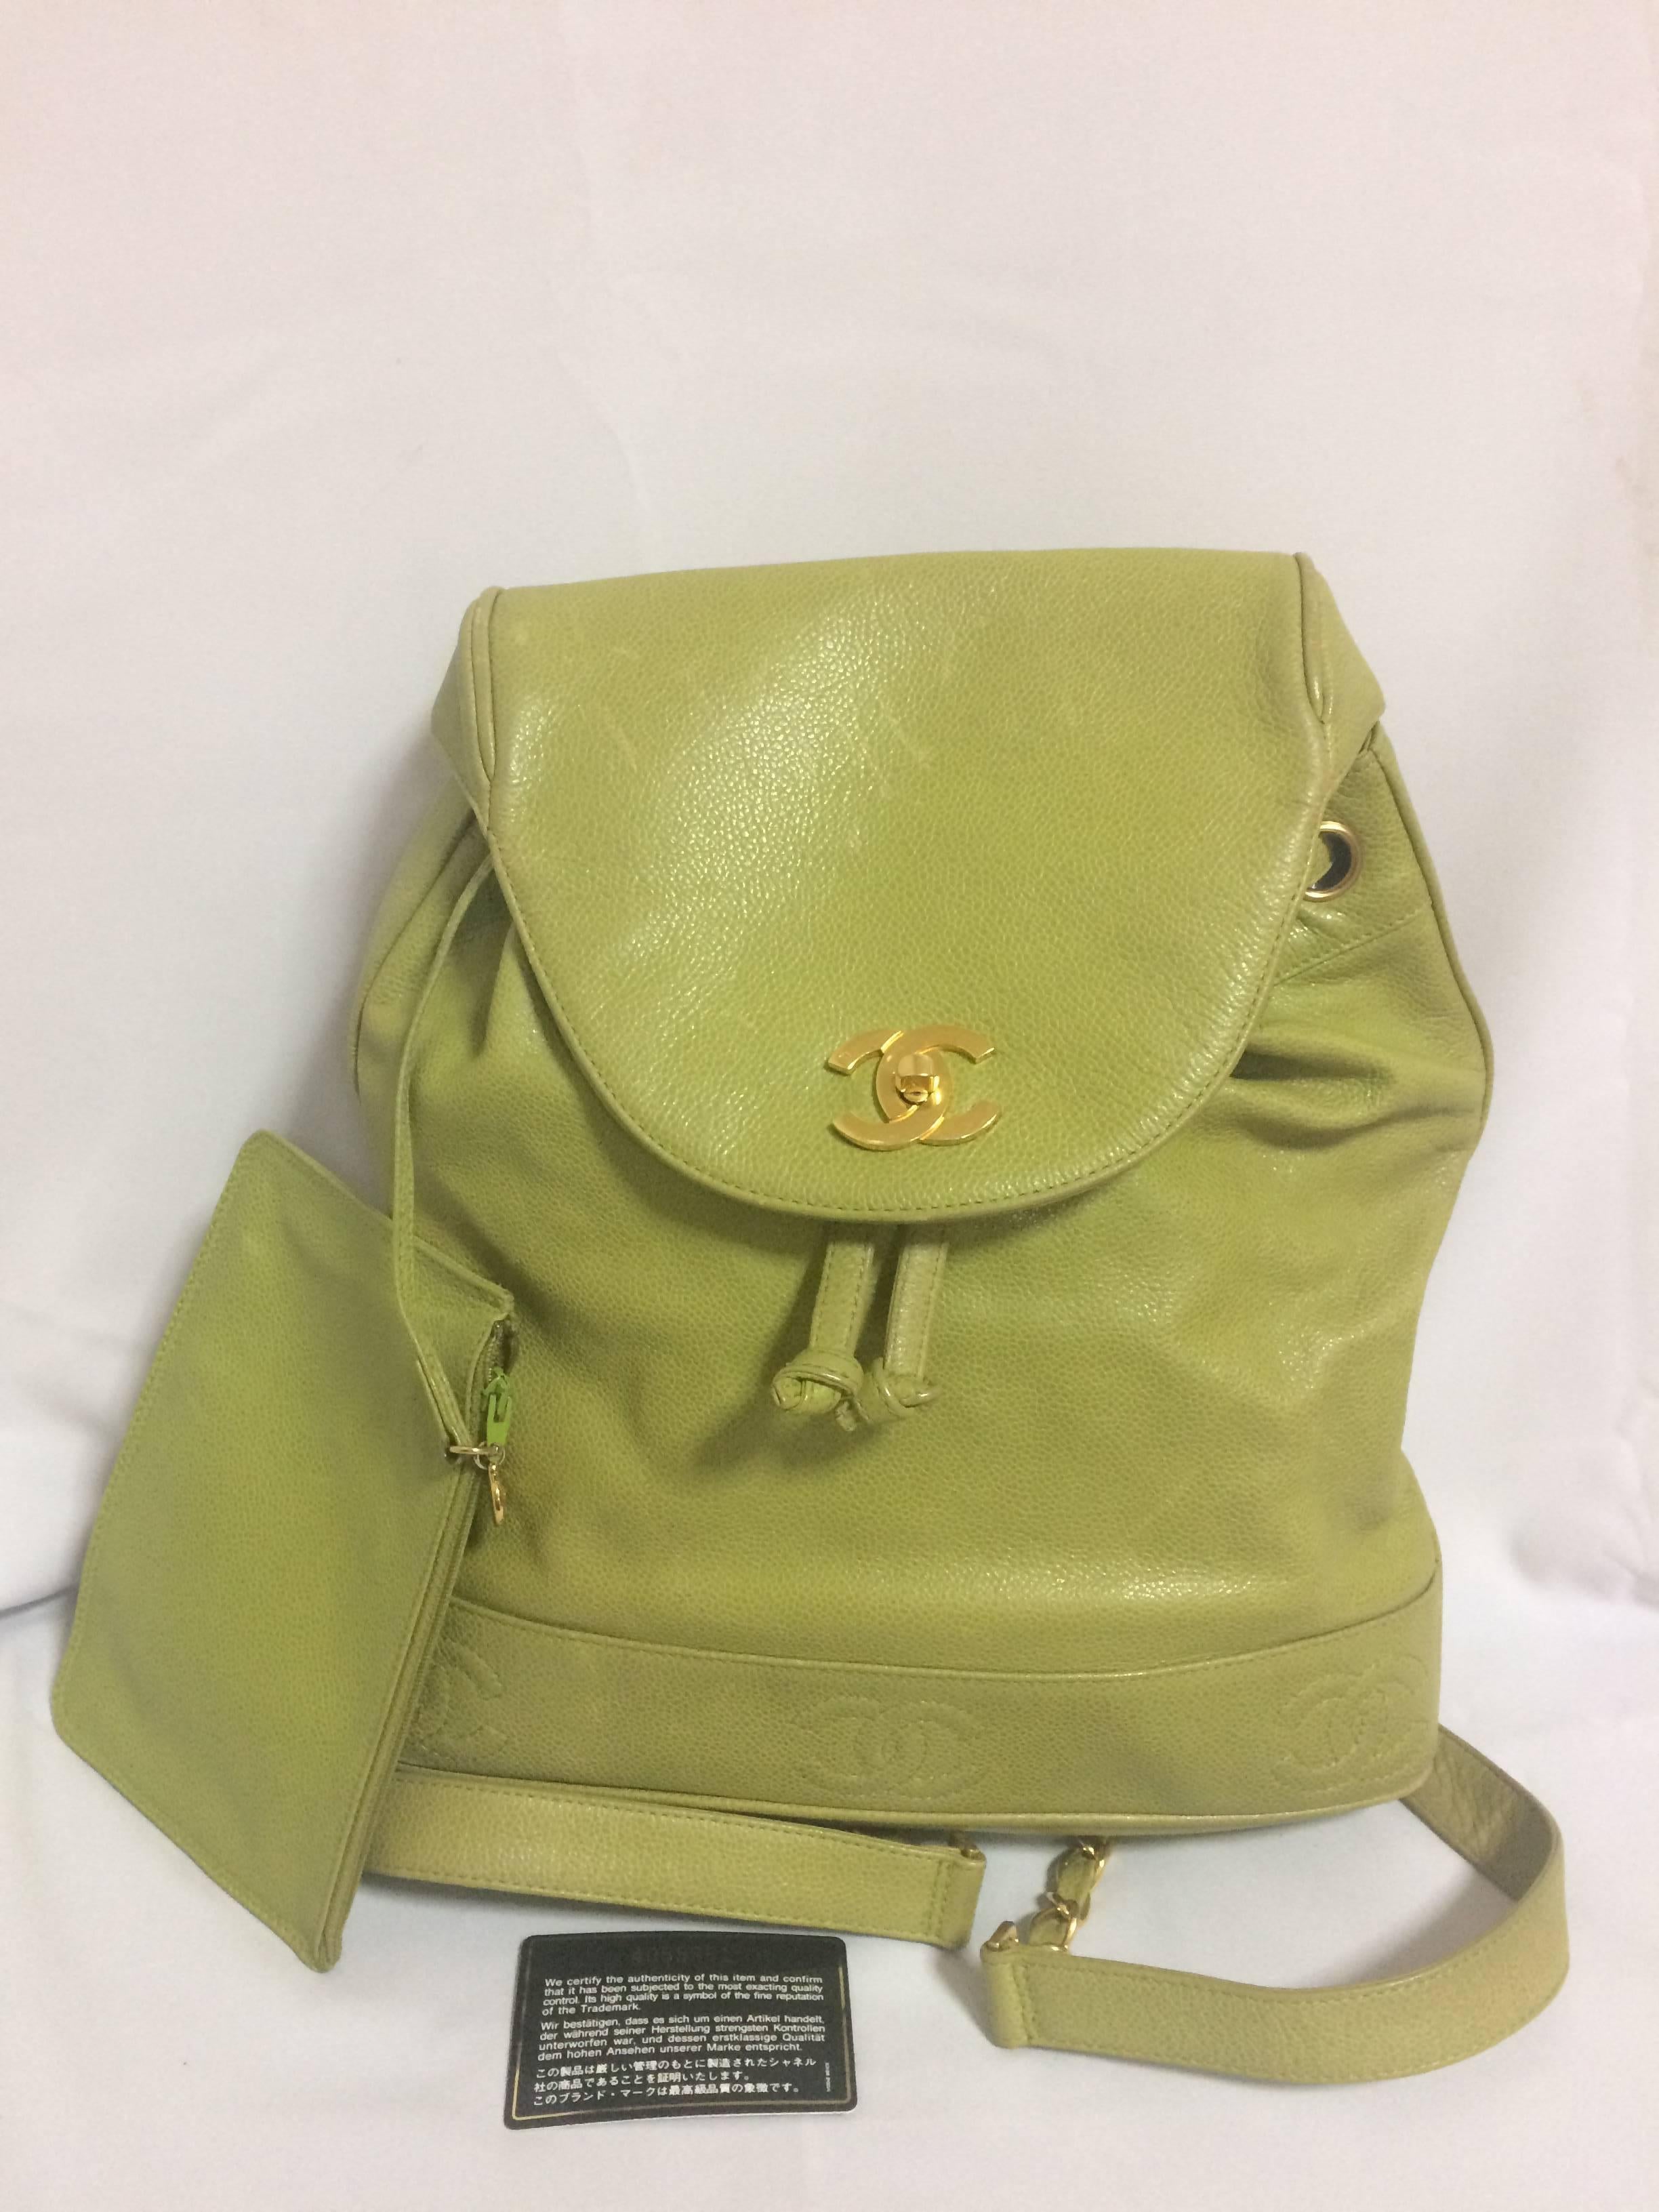 1990s. Vintage CHANEL green caviar leather backpack with gold chain strap and CC closure. Classic but rare color.

Rare color in classic caviar leather as backpack from CHANEL back in the 90's.  Don't miss it!

Introducing another vintage FAB piece,